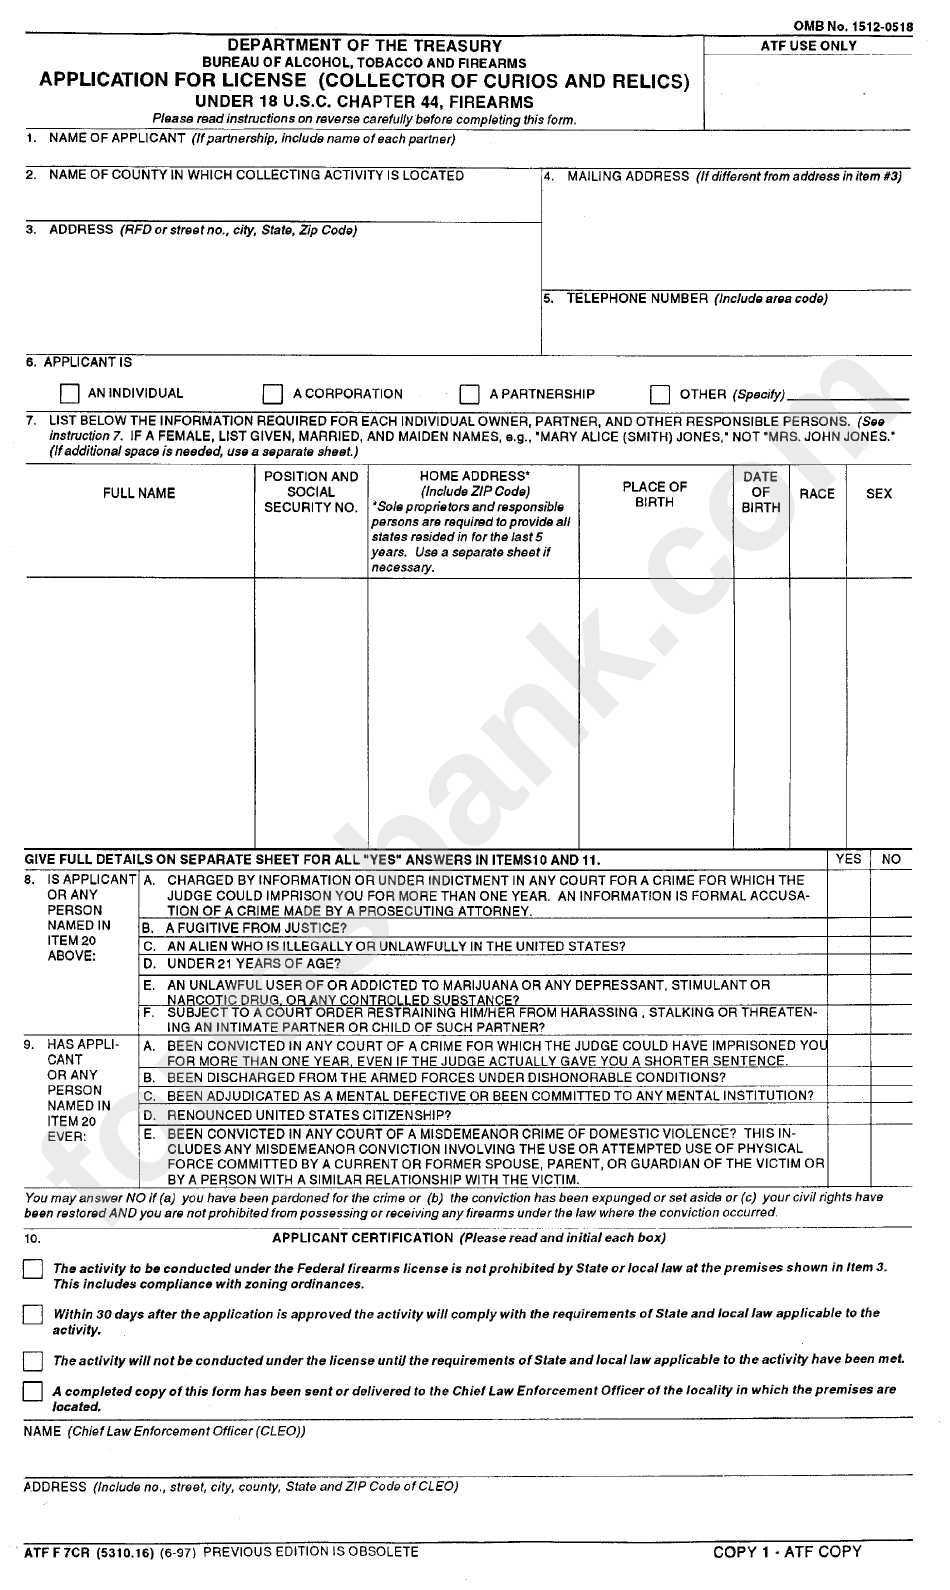 Form Atf 7cr - Application For License (Collector Of Curios And Relics) - Bureau Of Alcohol, Tobacco And Firearms Of Department Of The Treasury